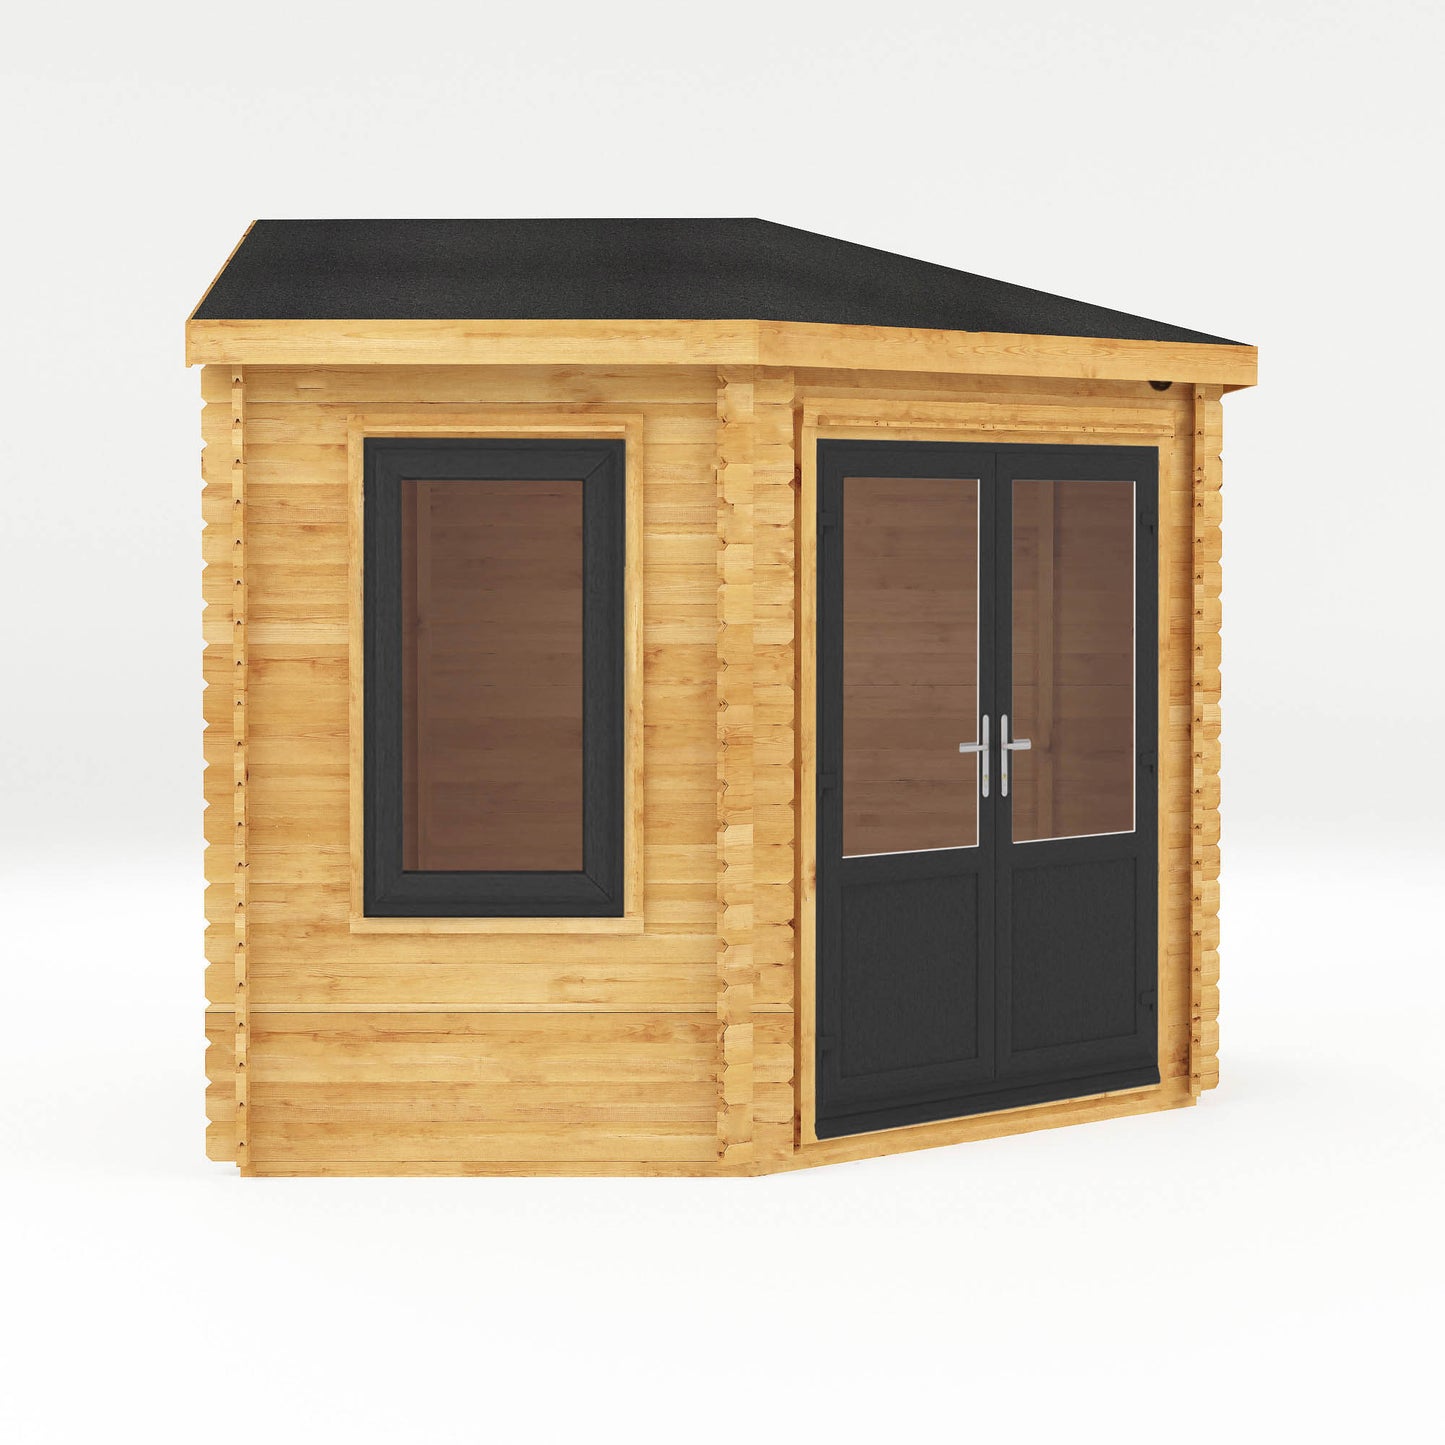 The 3m x 3m Goldcrest Corner Log Cabin with Anthracite UPVC